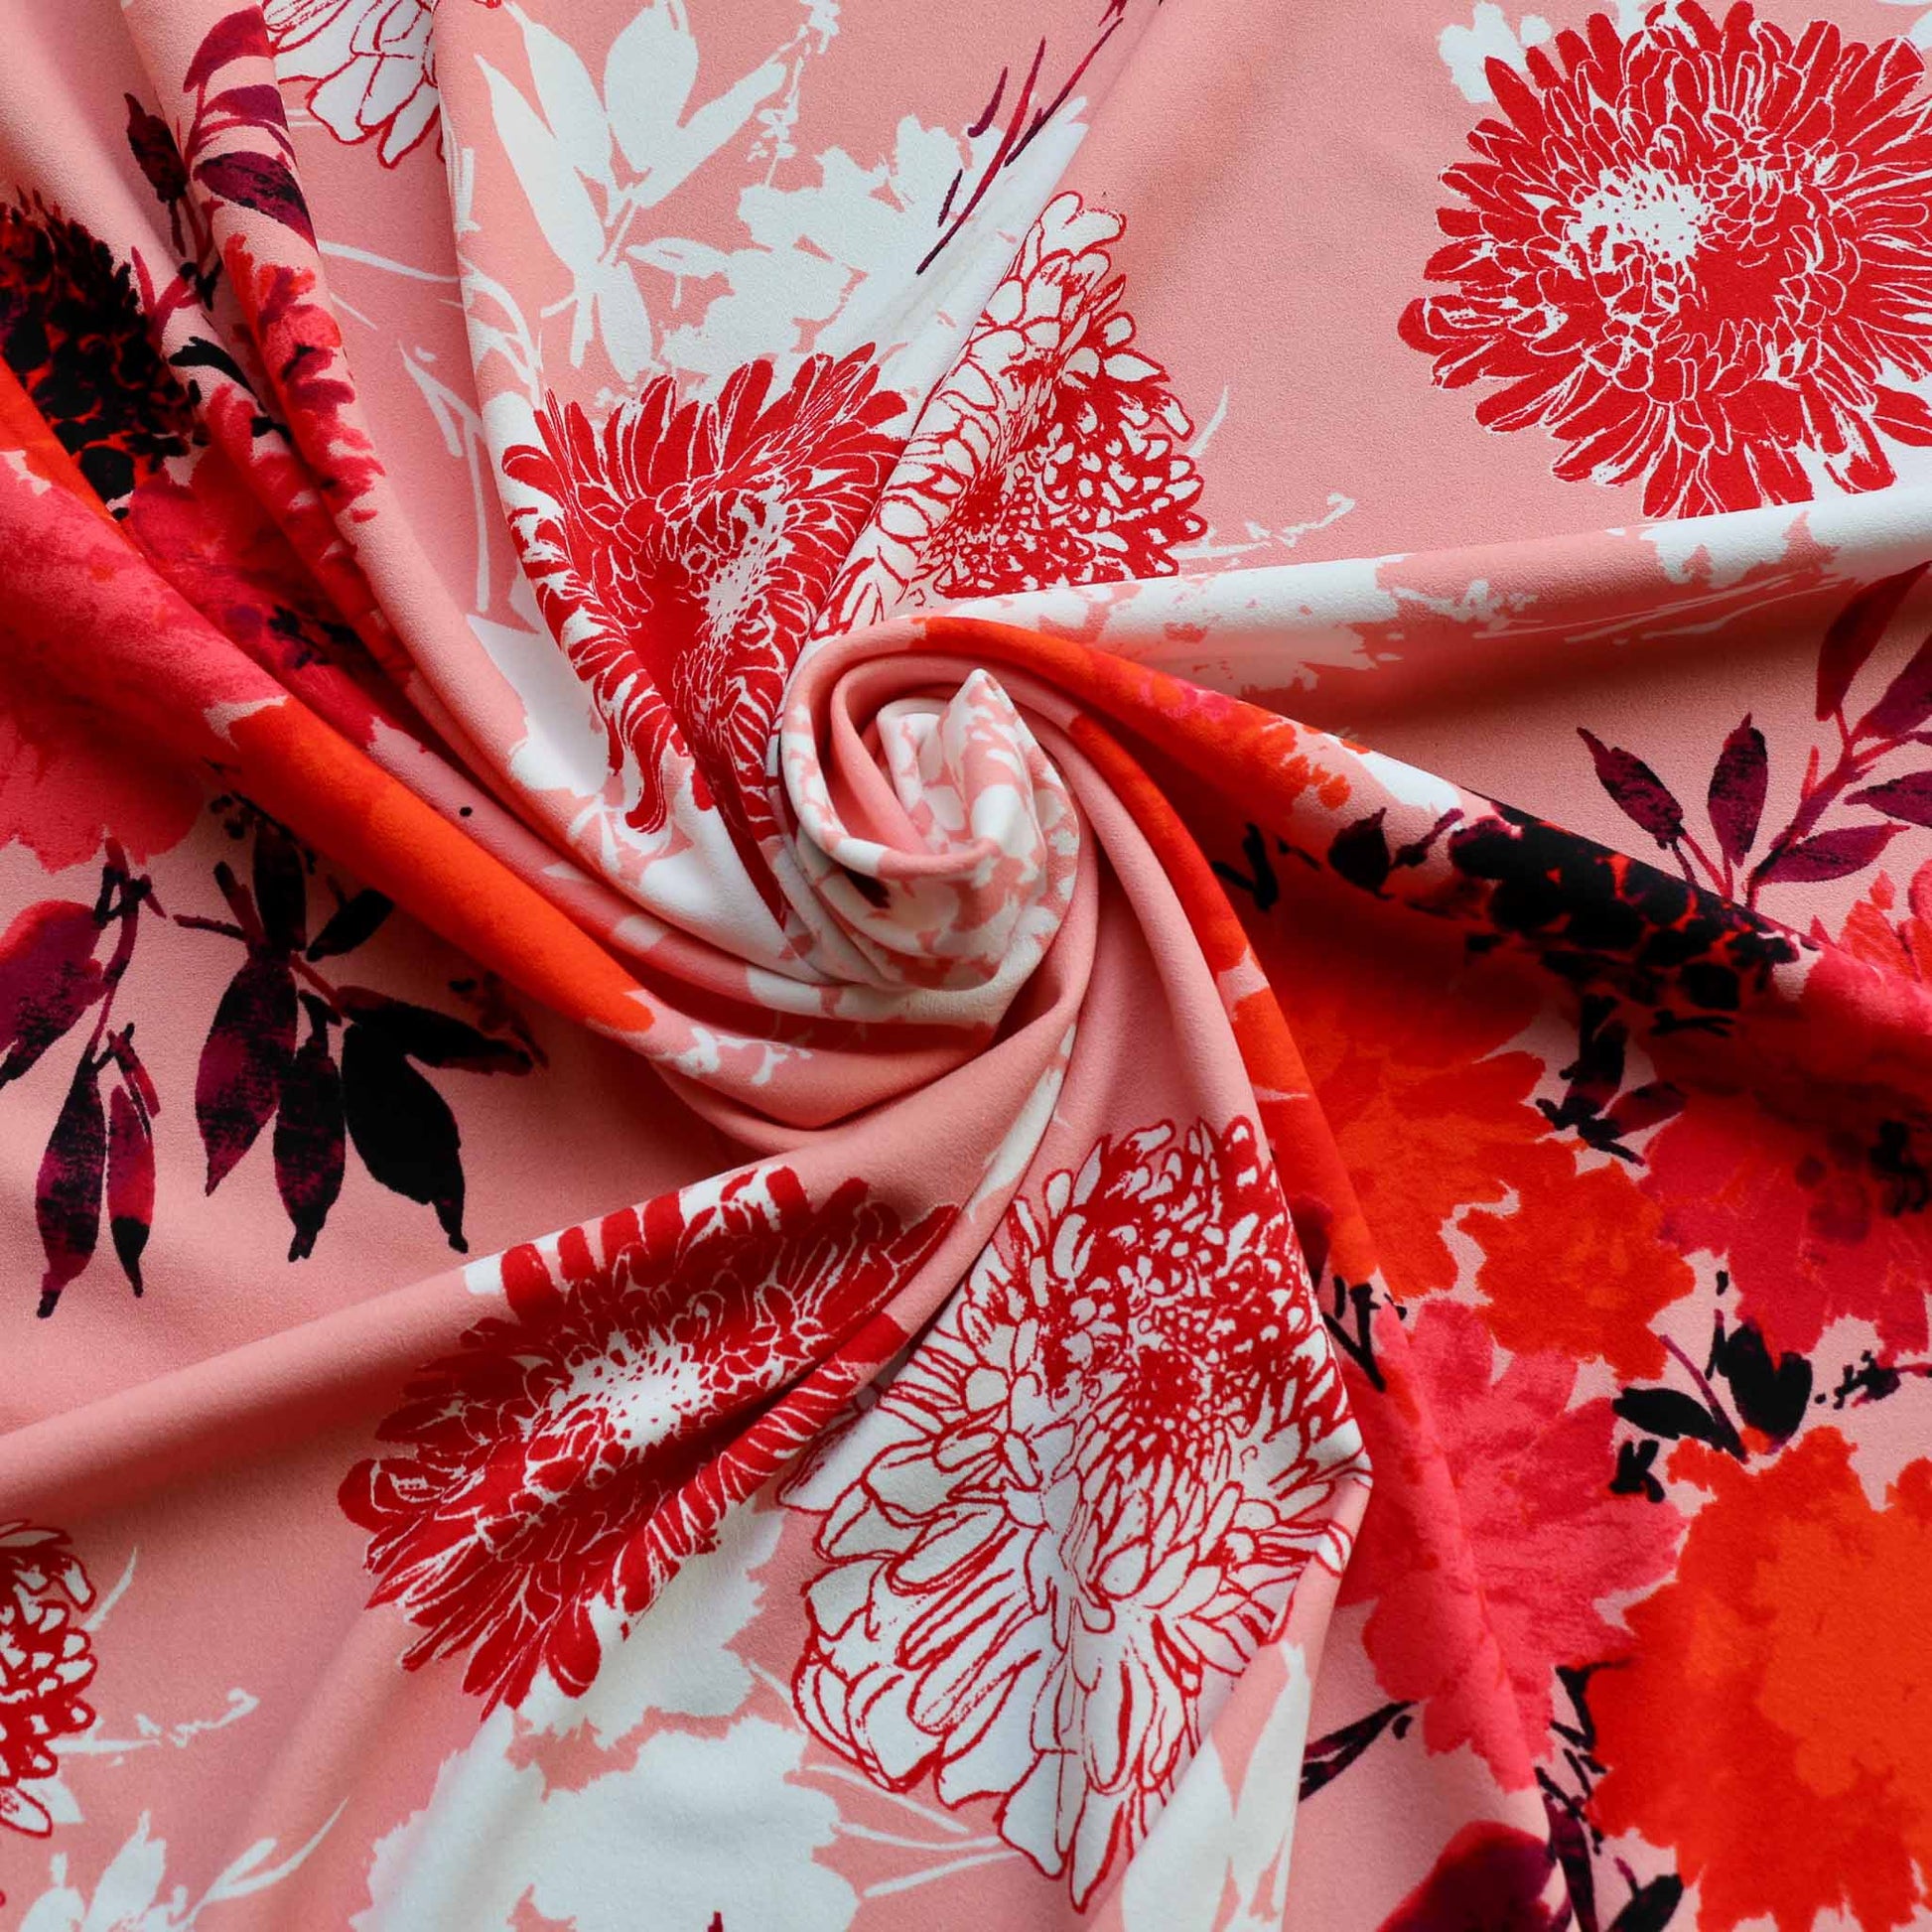 john kaldor dressmaking fabric in pink with red and white floral pattern